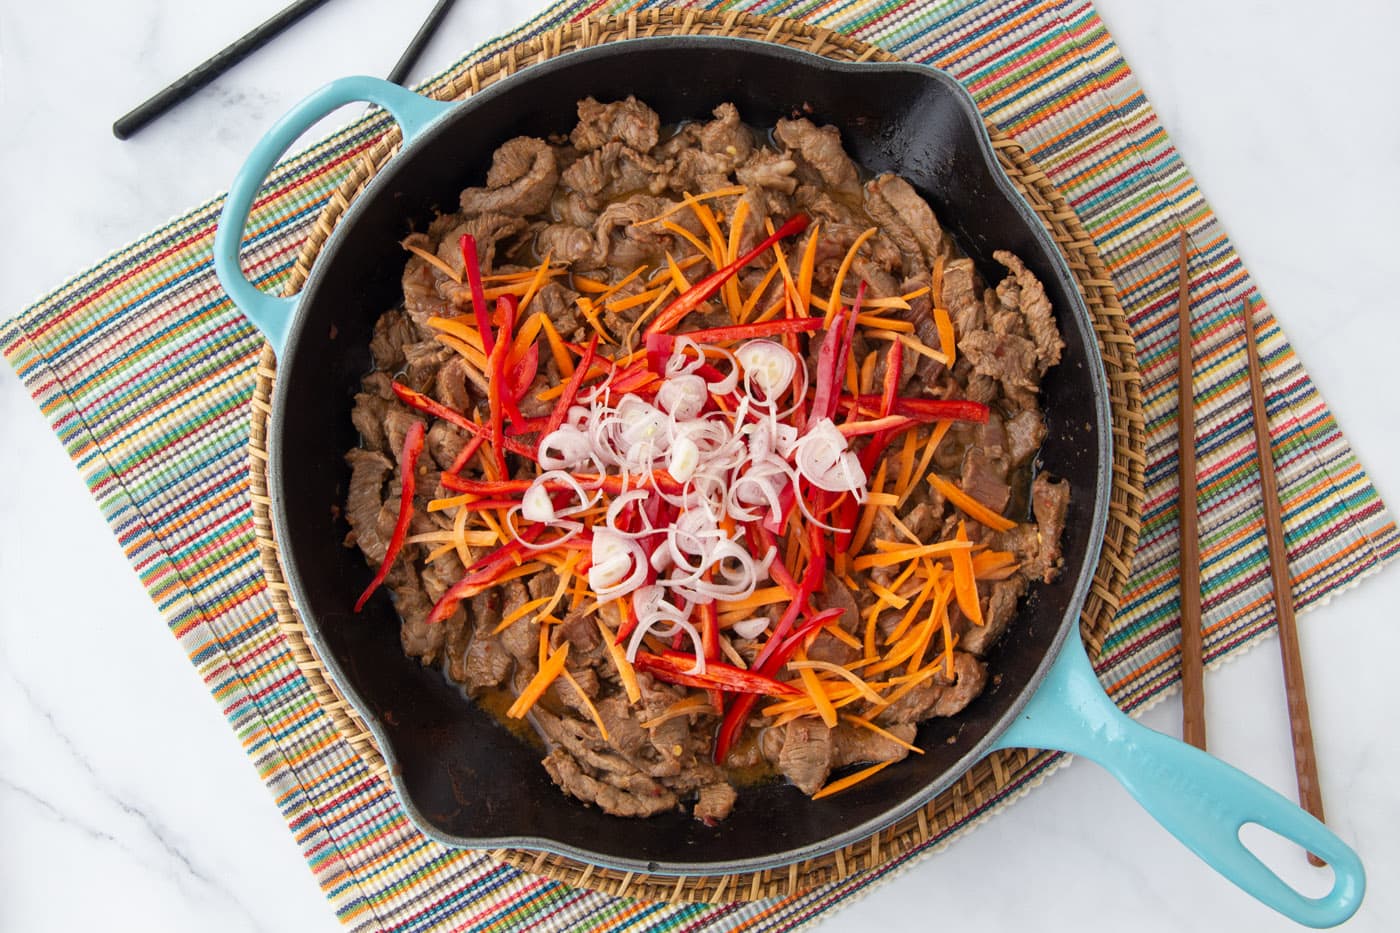 shallots, peppers, and carrots over beef in a skillet